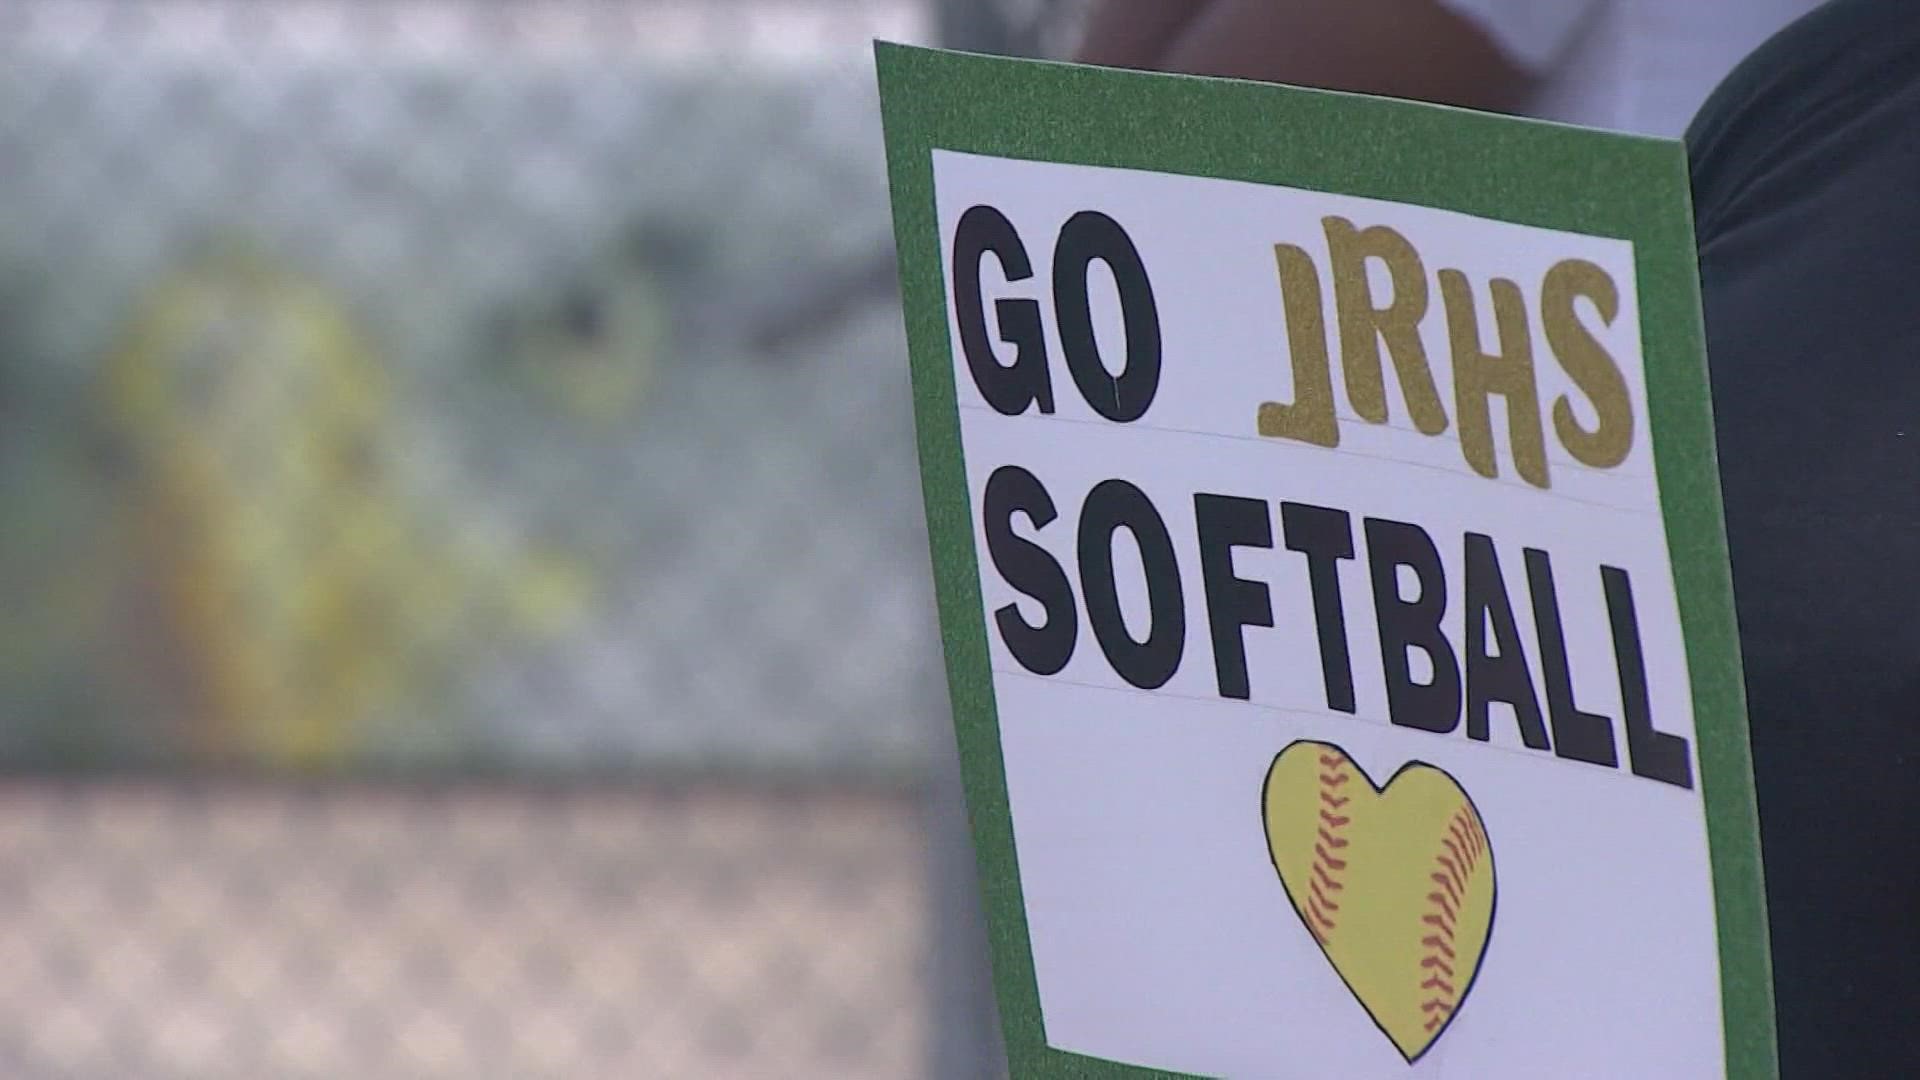 The Lake Ridge High School Girls' Softball Team got a great send-off, as they left for the state playoffs Thursday, June 2.